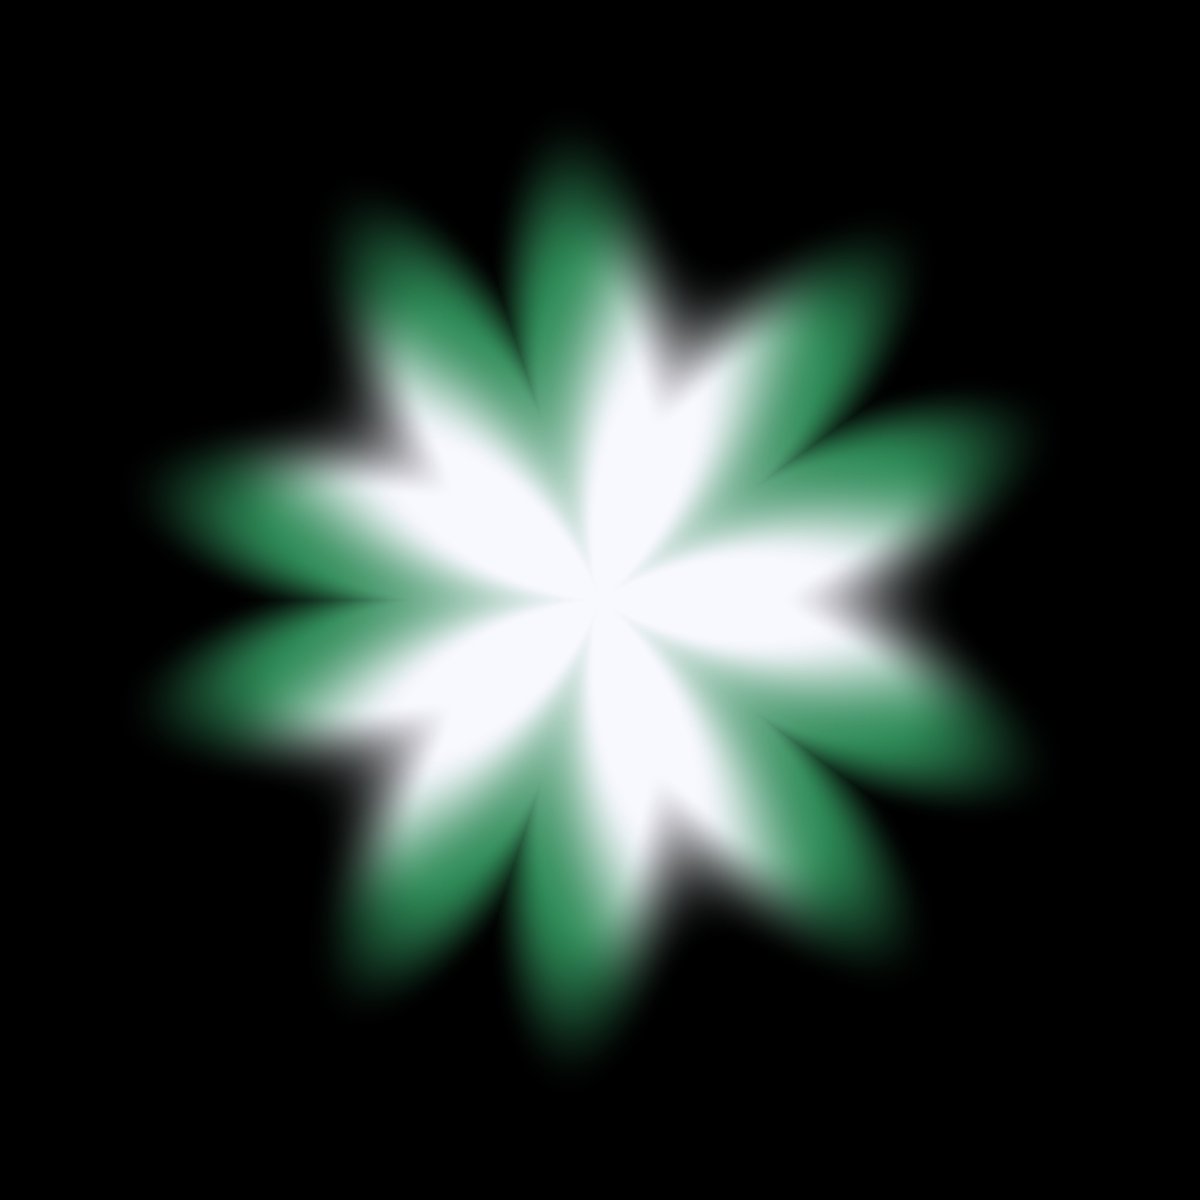 {'name': 'Perennial #802', 'attributes': [{'trait_type':'Type', 'value': 'Symmetric'},{'trait_type':'Petals','value': '5'},{'trait_type': 'Shape','value': 'Clover'},{'trait_type': 'Accord','value': 'Field'},{'trait_type': 'Markings','value': 'Streaked'}]}